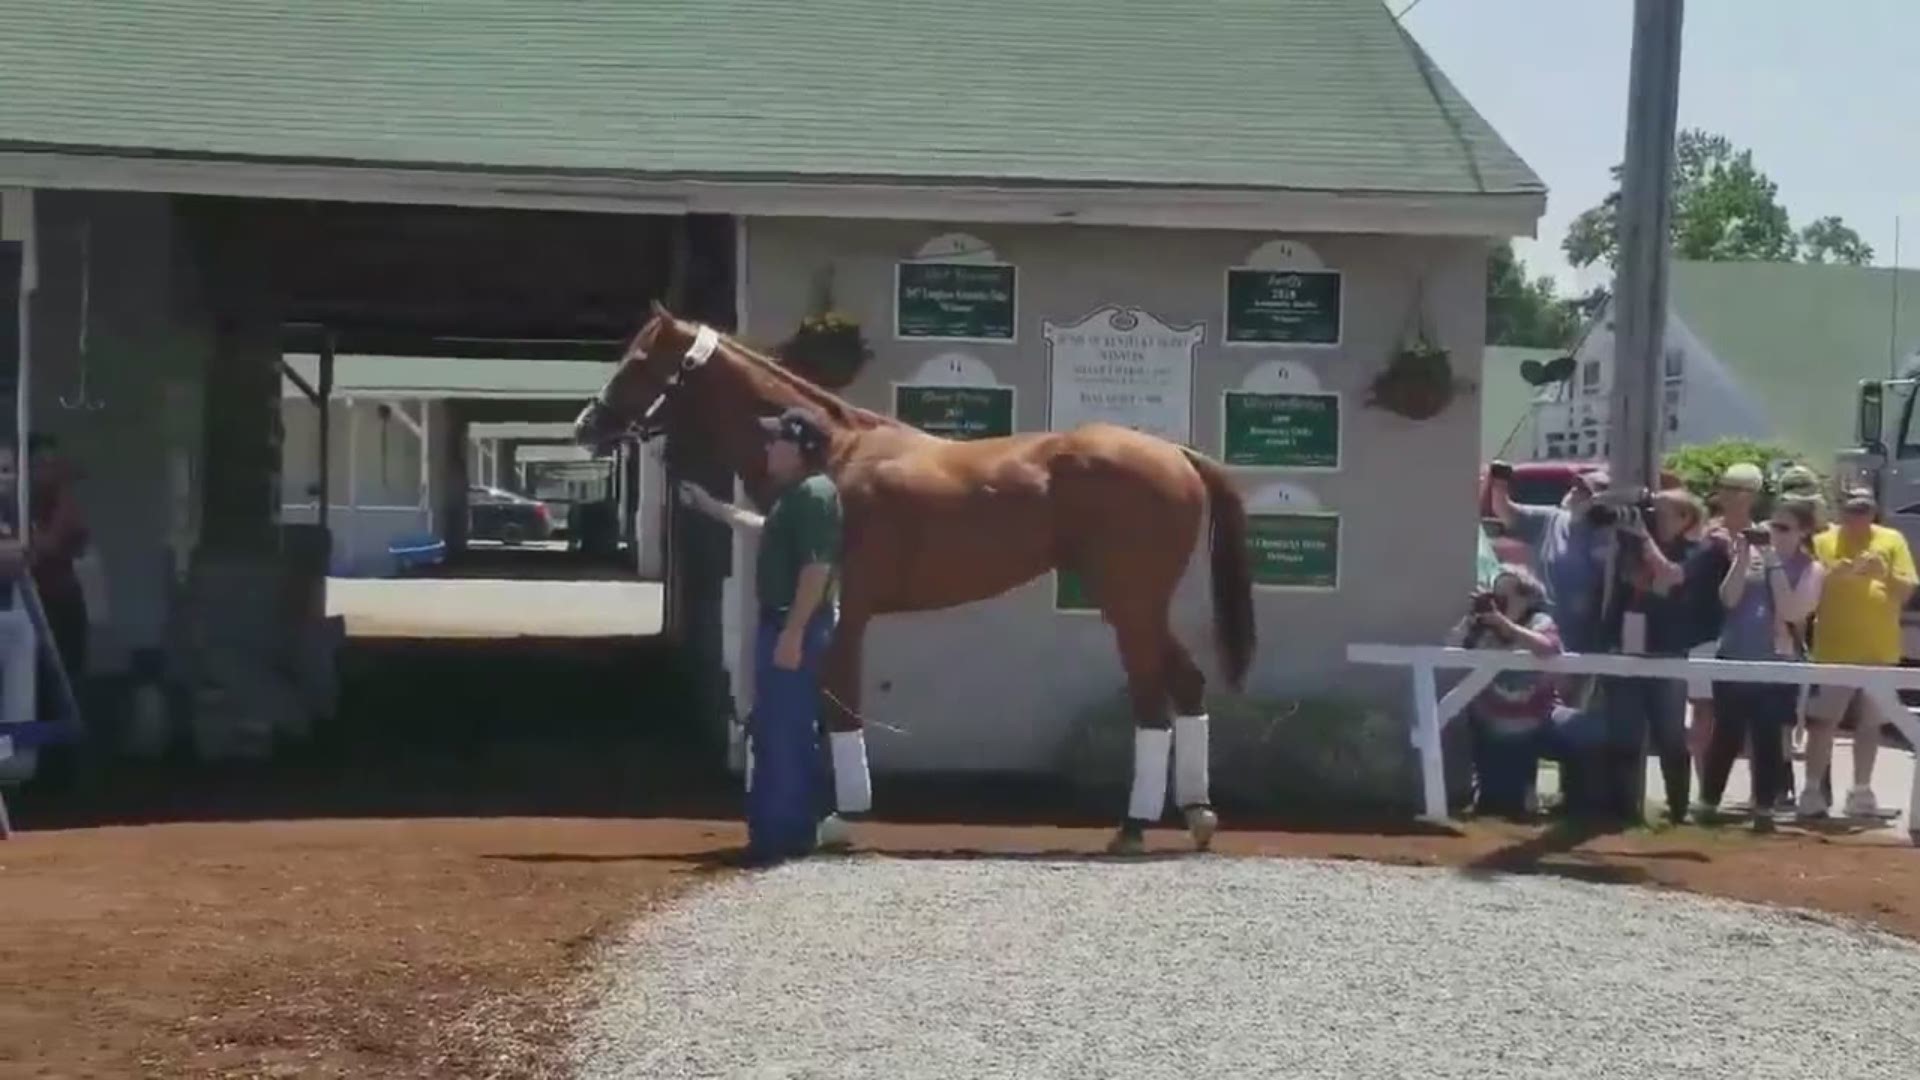 Justify returned to Churchill Downs on Sunday at 2:15 p.m. to begin training for the third jewel in racing's Triple Crown, the June 9 Belmont Stakes.